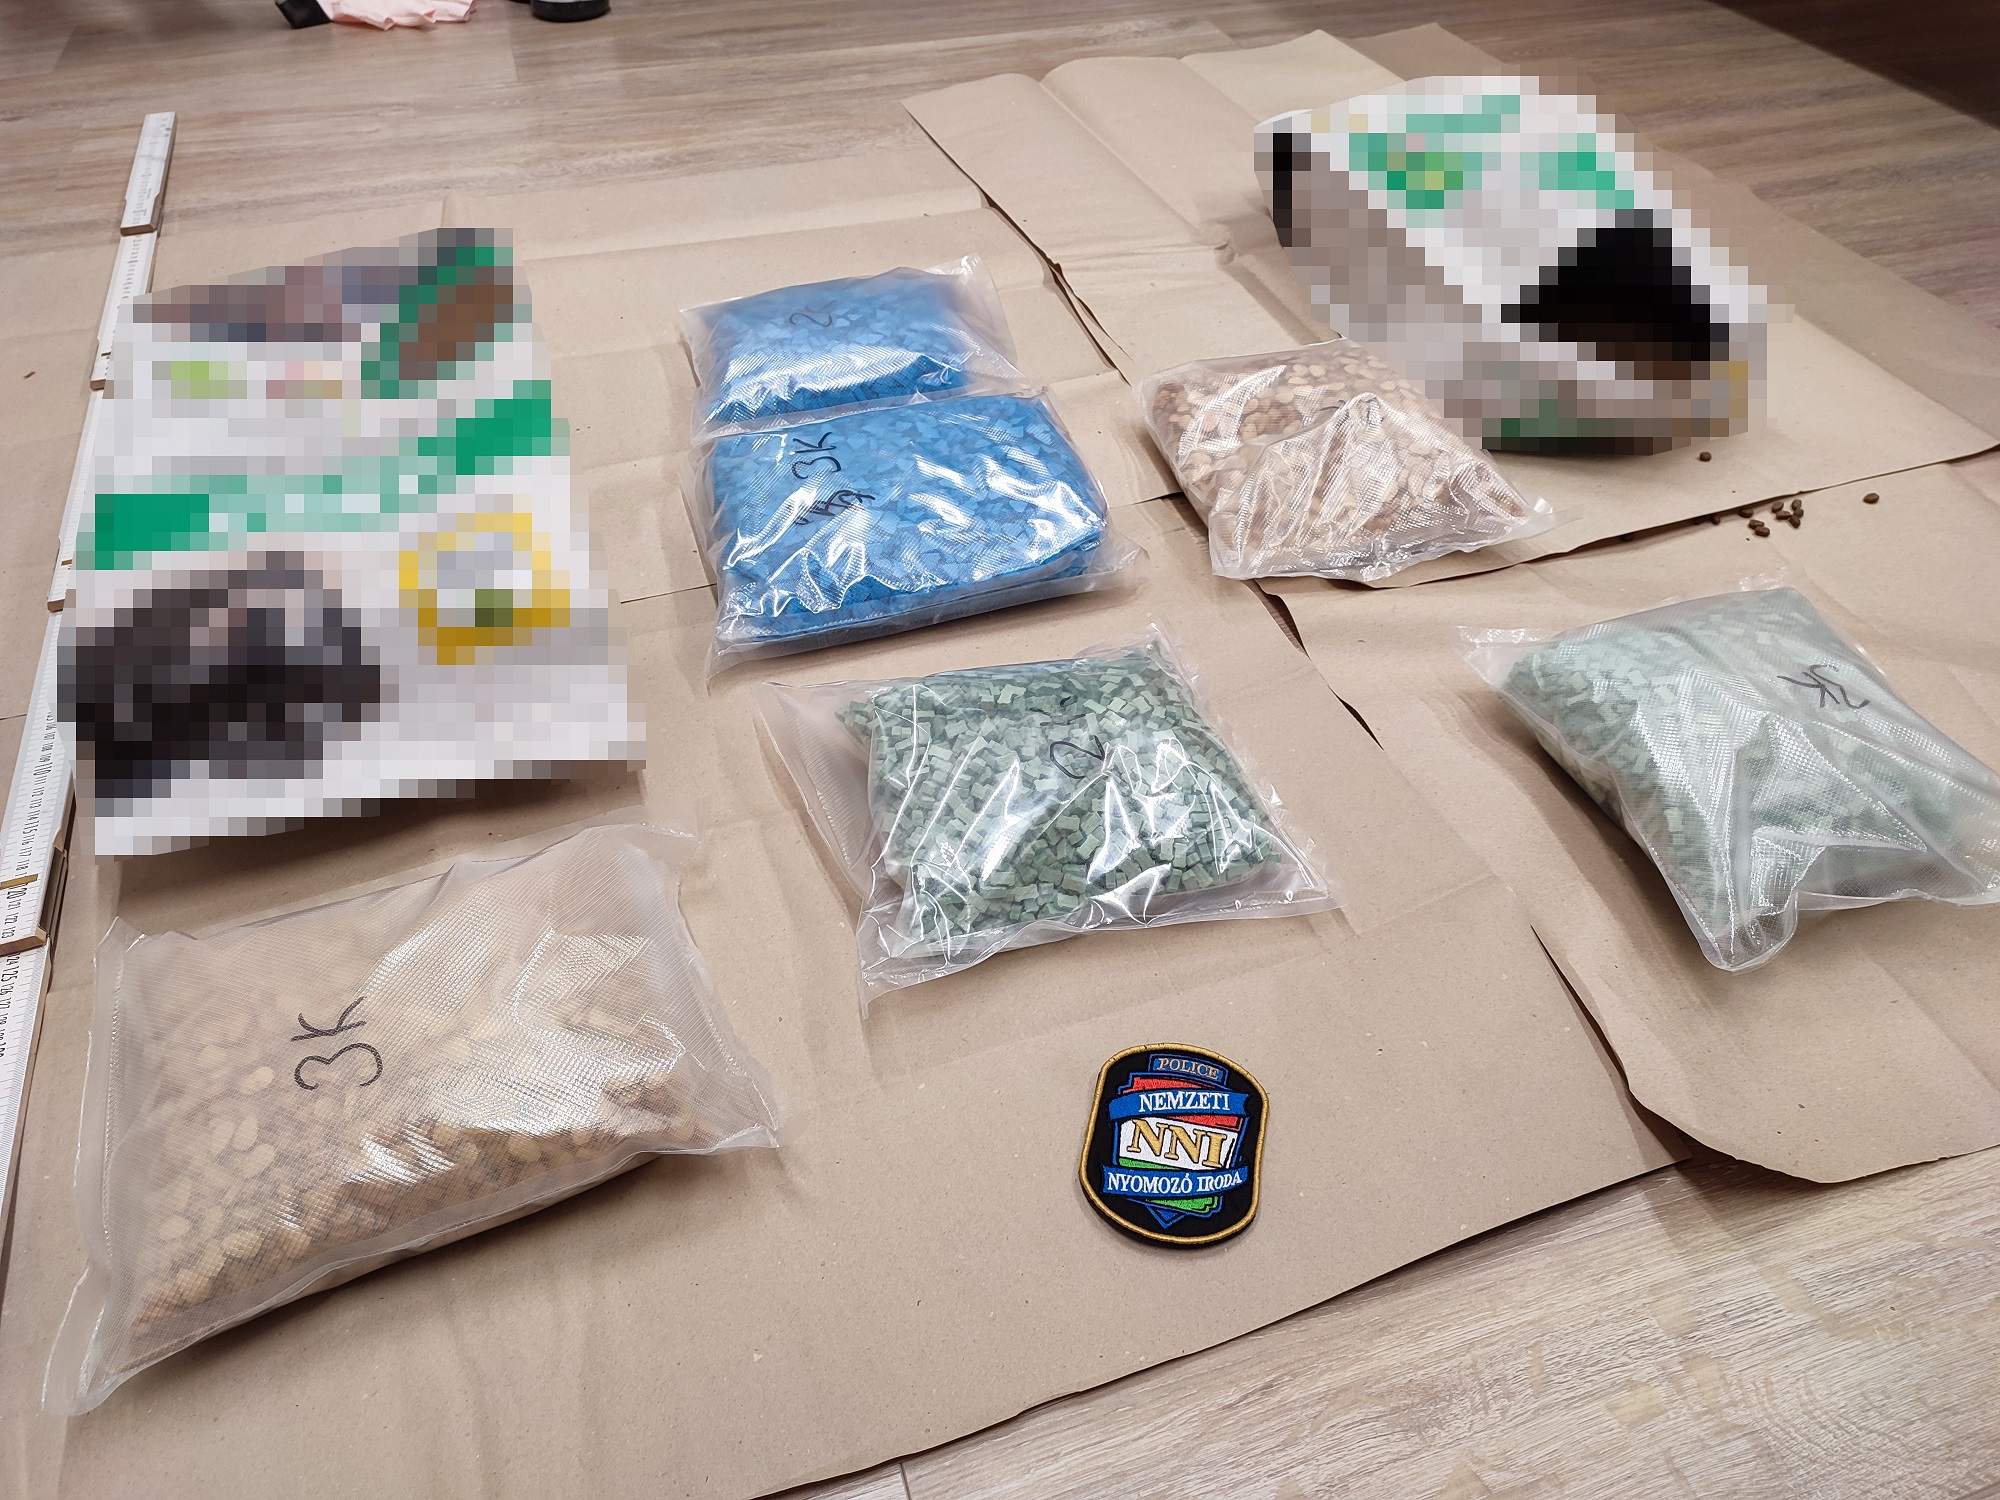 Watch: Hungarian Police Carry Out Major Drug Bust with FBI Help